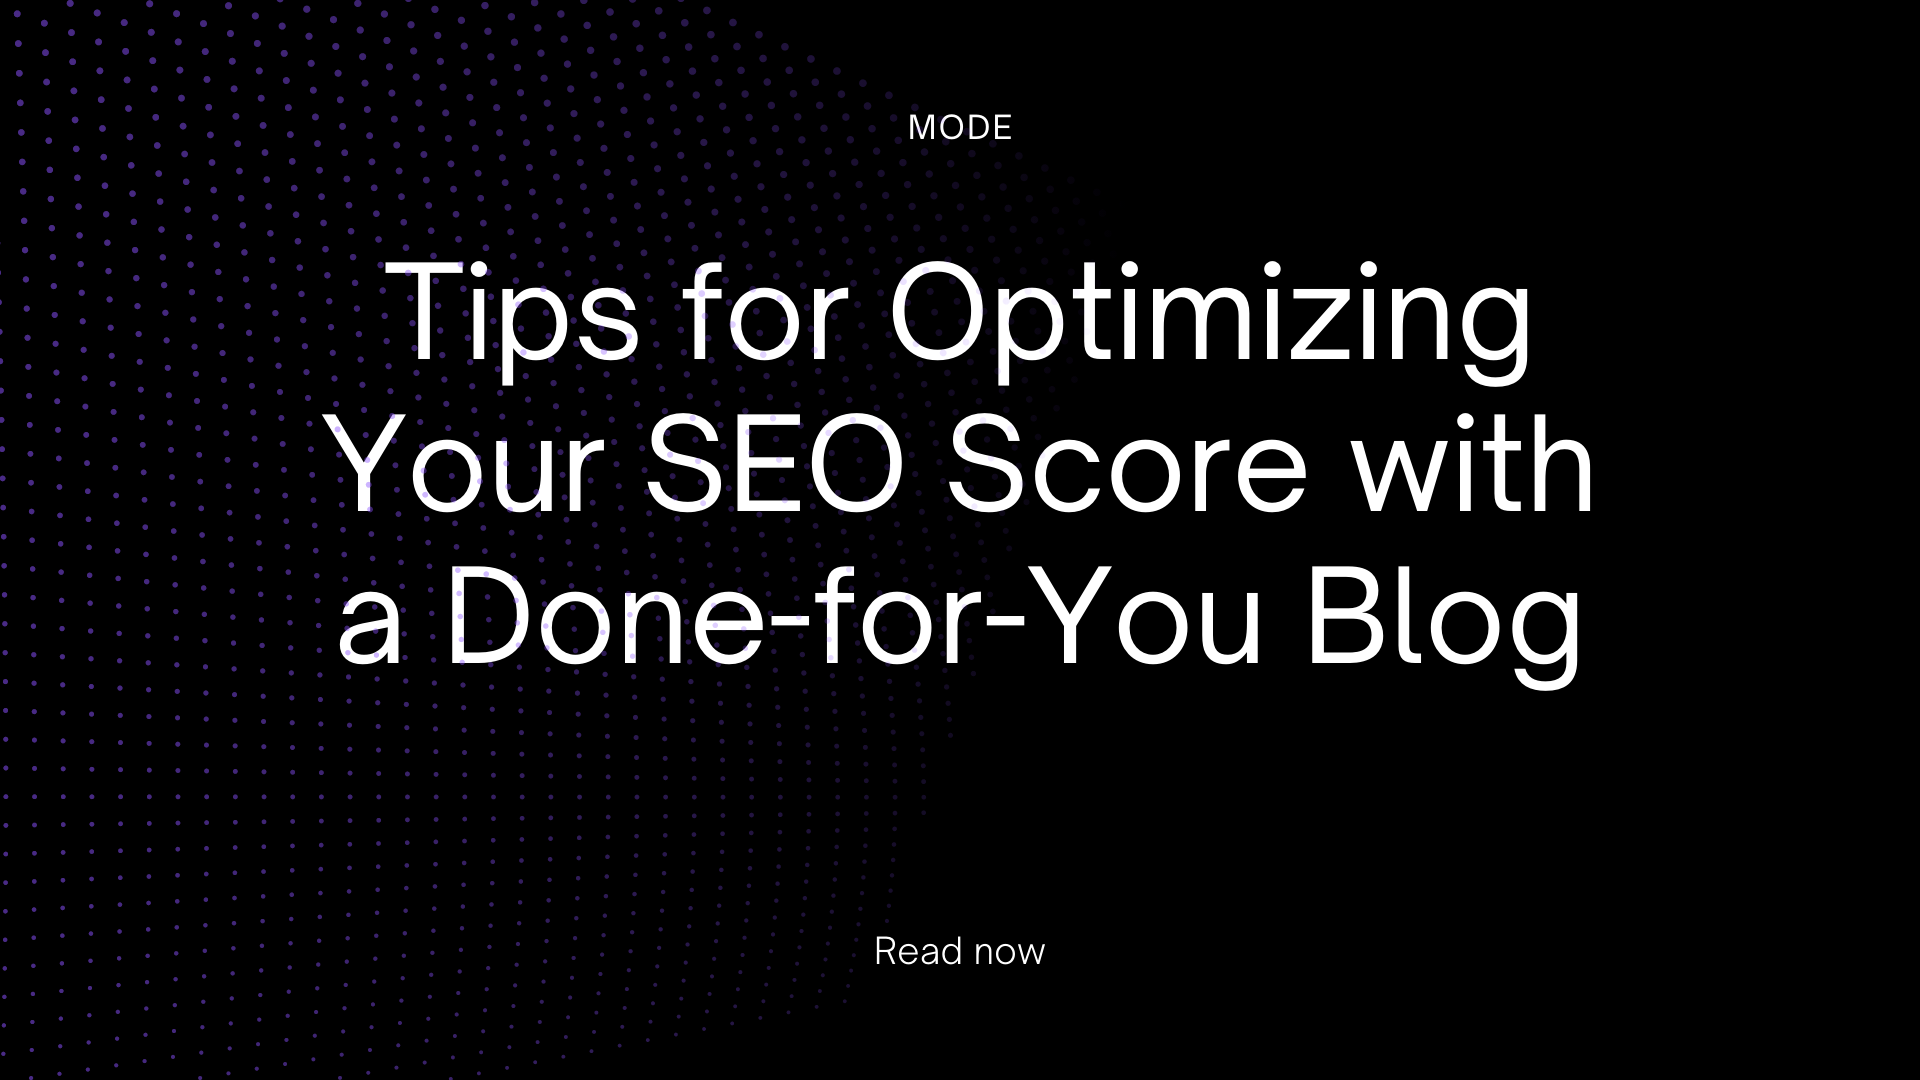 Tips for Optimizing Your SEO Score with a Done-for-You Blog